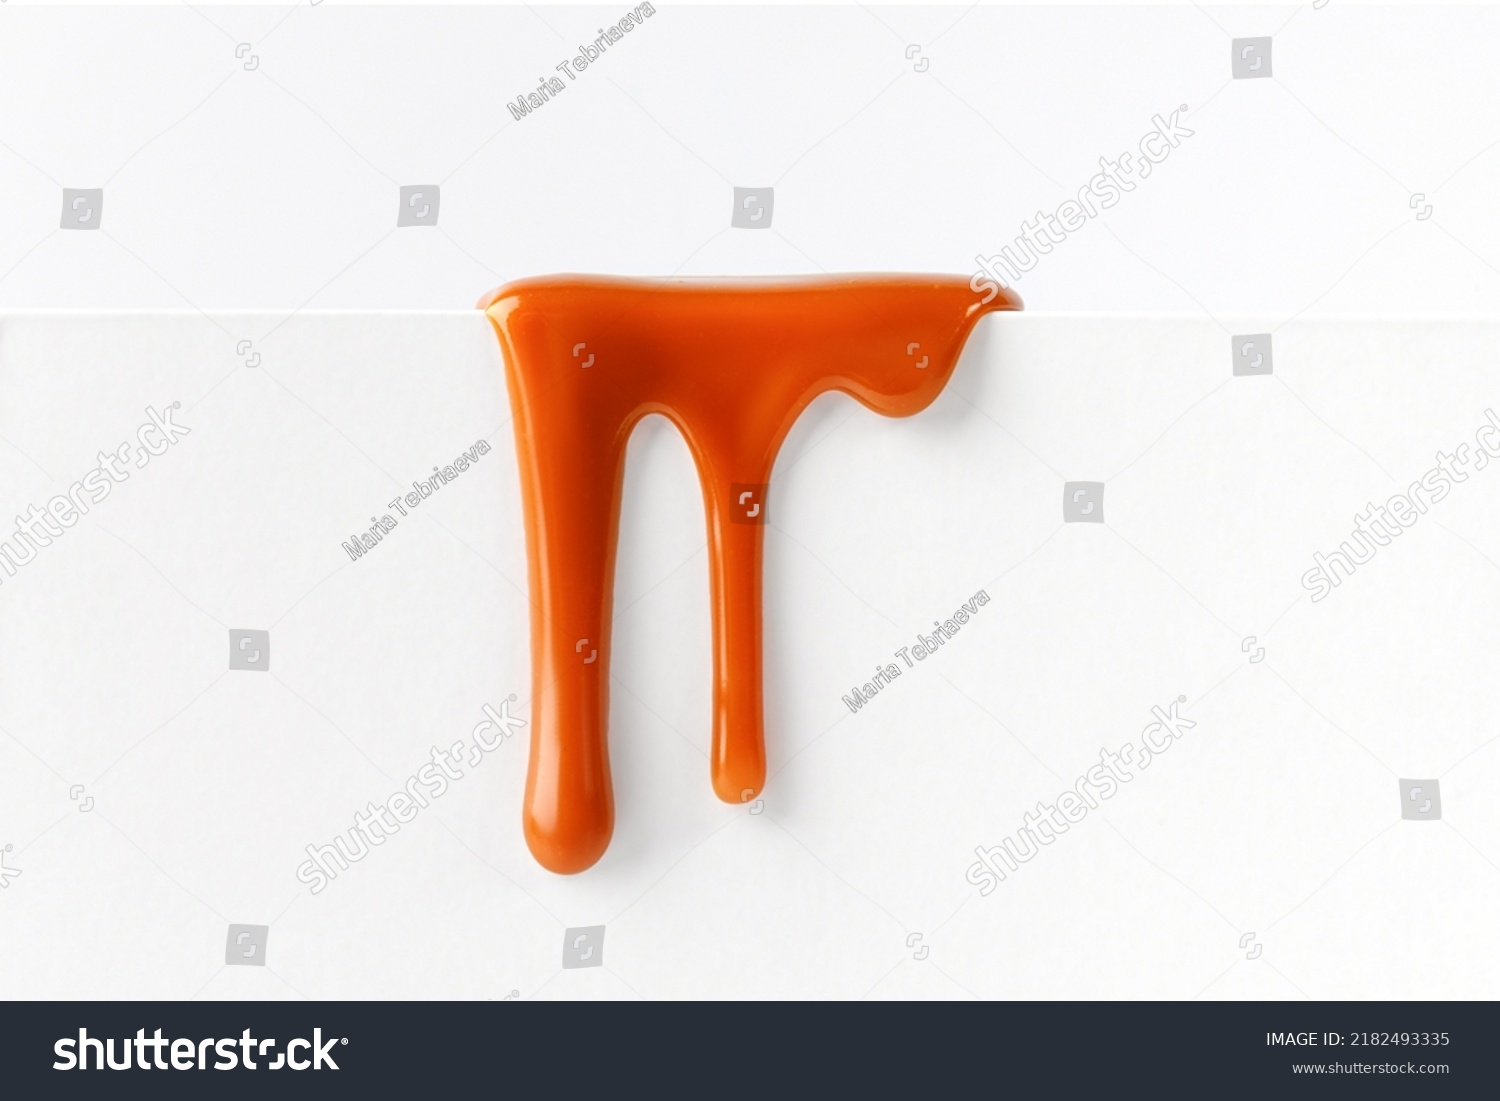 Dripping caramel drops of sweet caramel sauce isolated on white background. Melted caramel sauce drip, drops of sweet liquid toffee. #2182493335